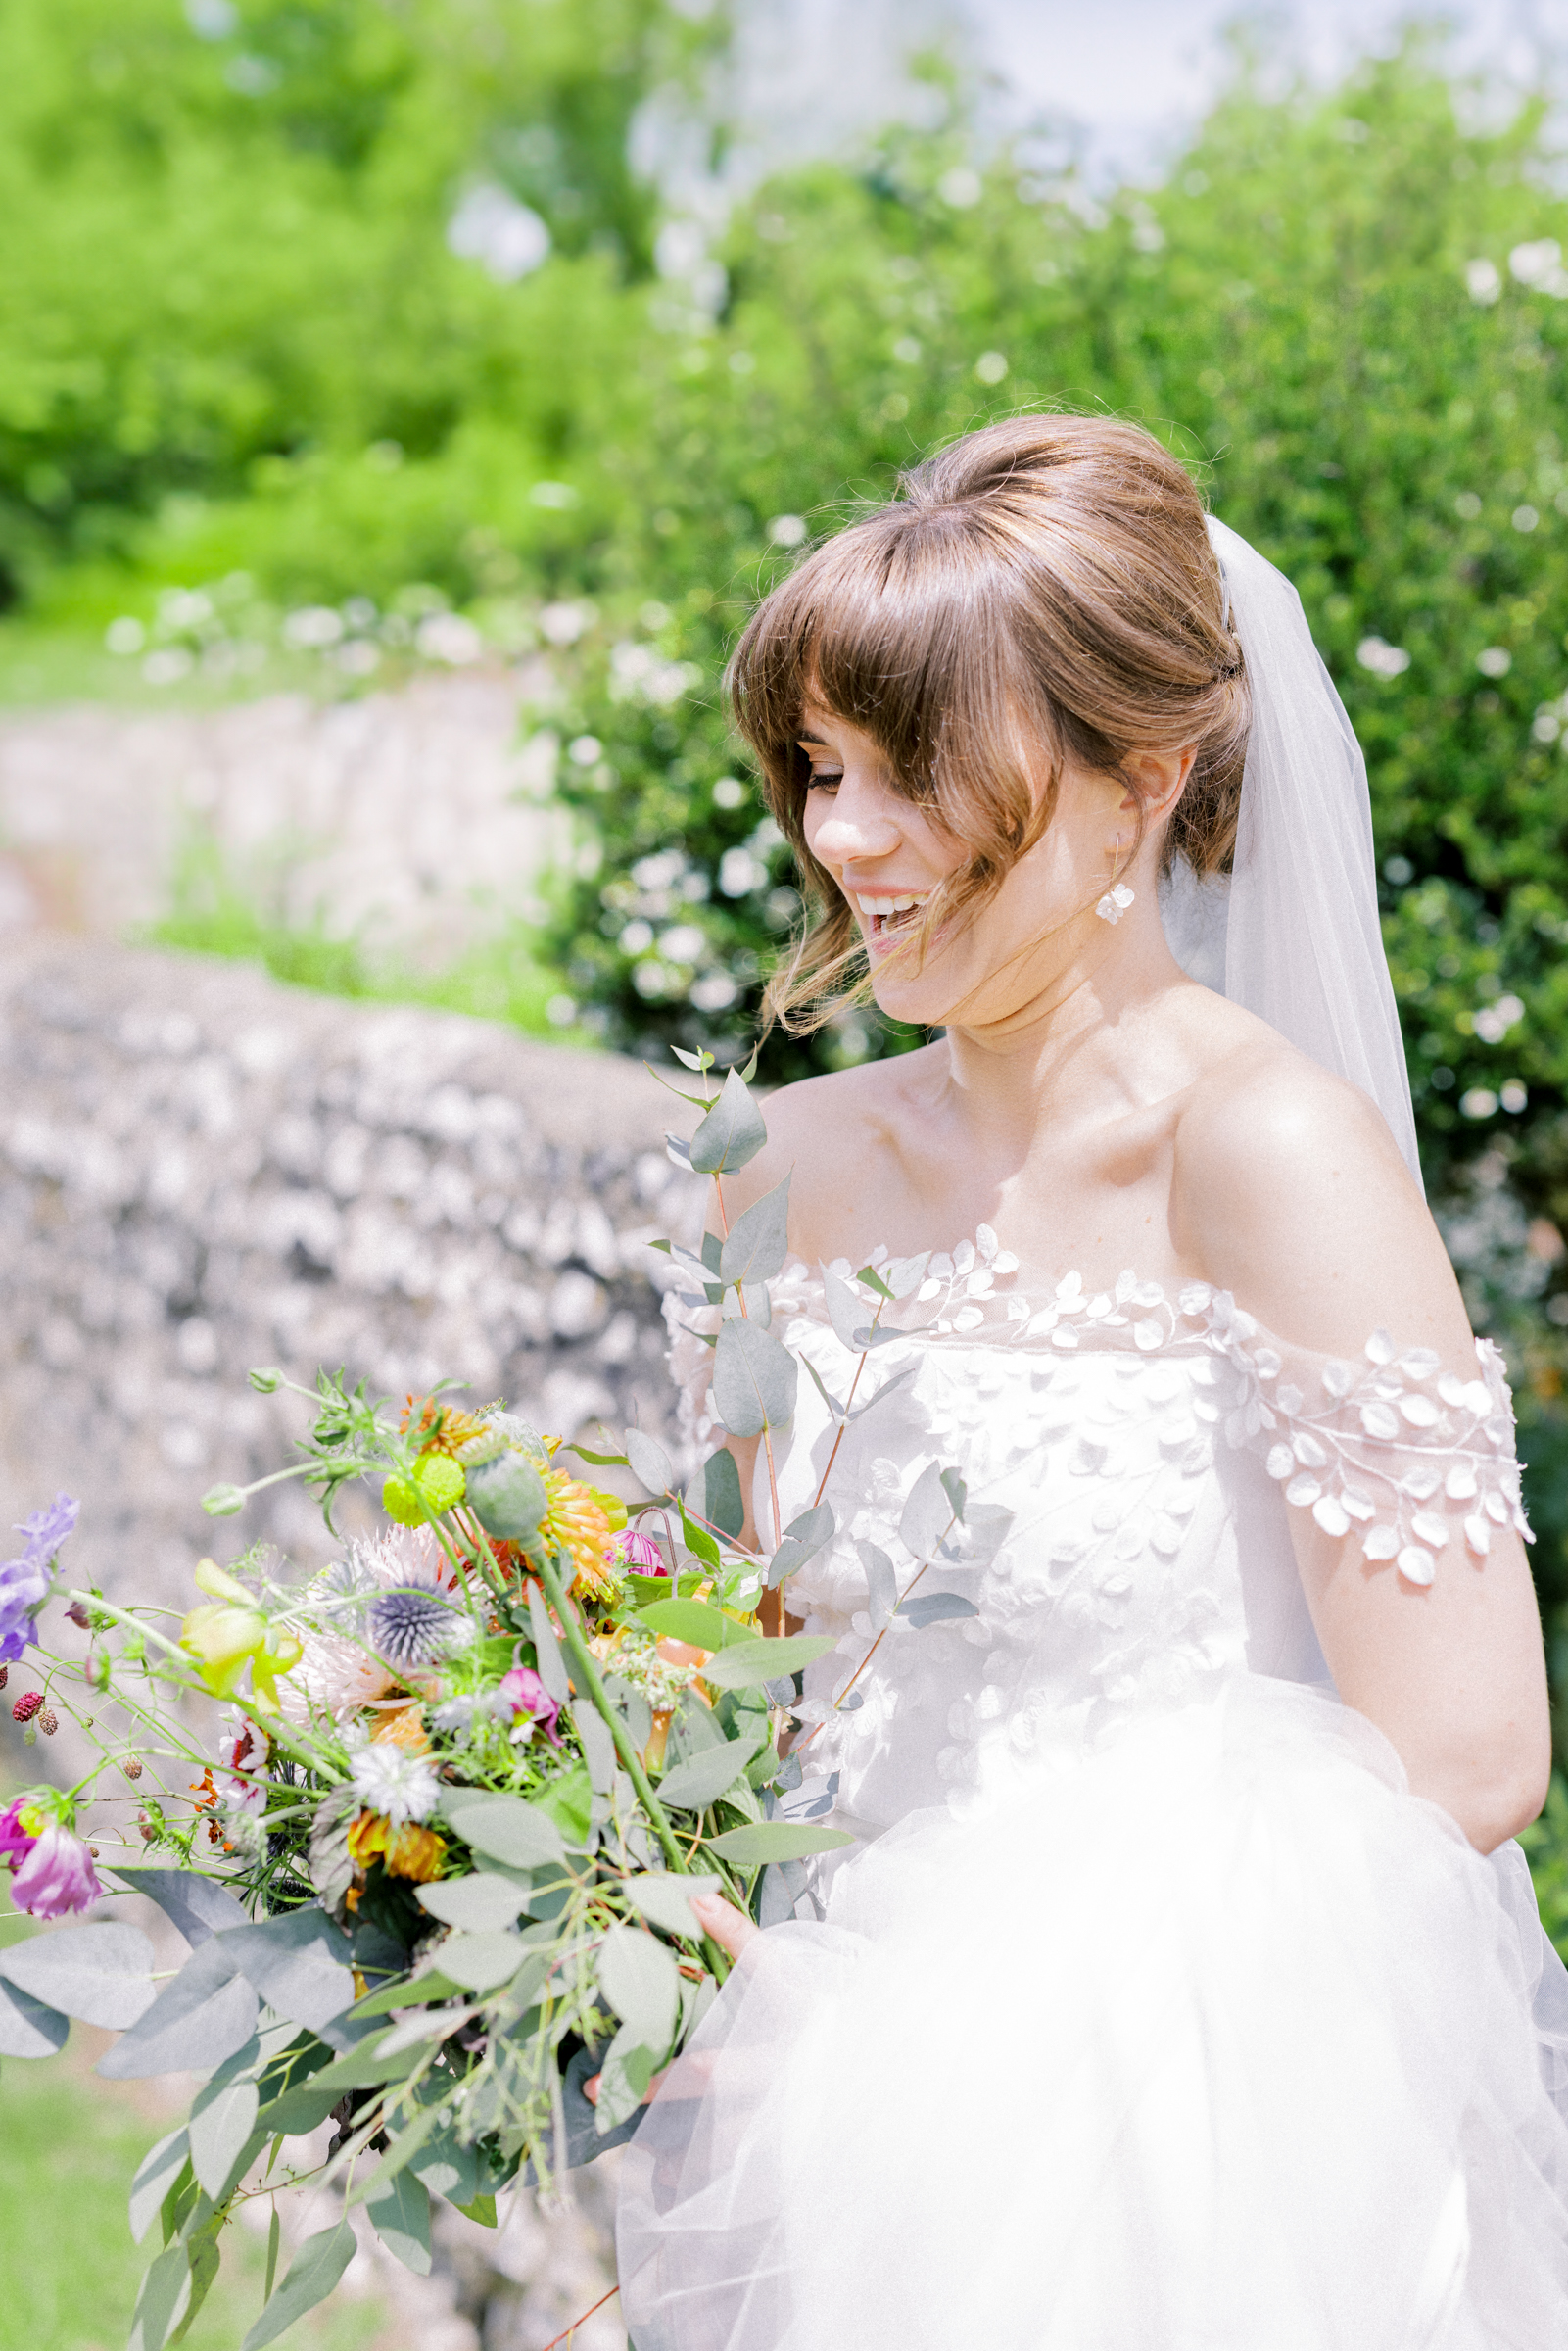 Bride and her homemade flowers at her South Stoke Barn Wedding